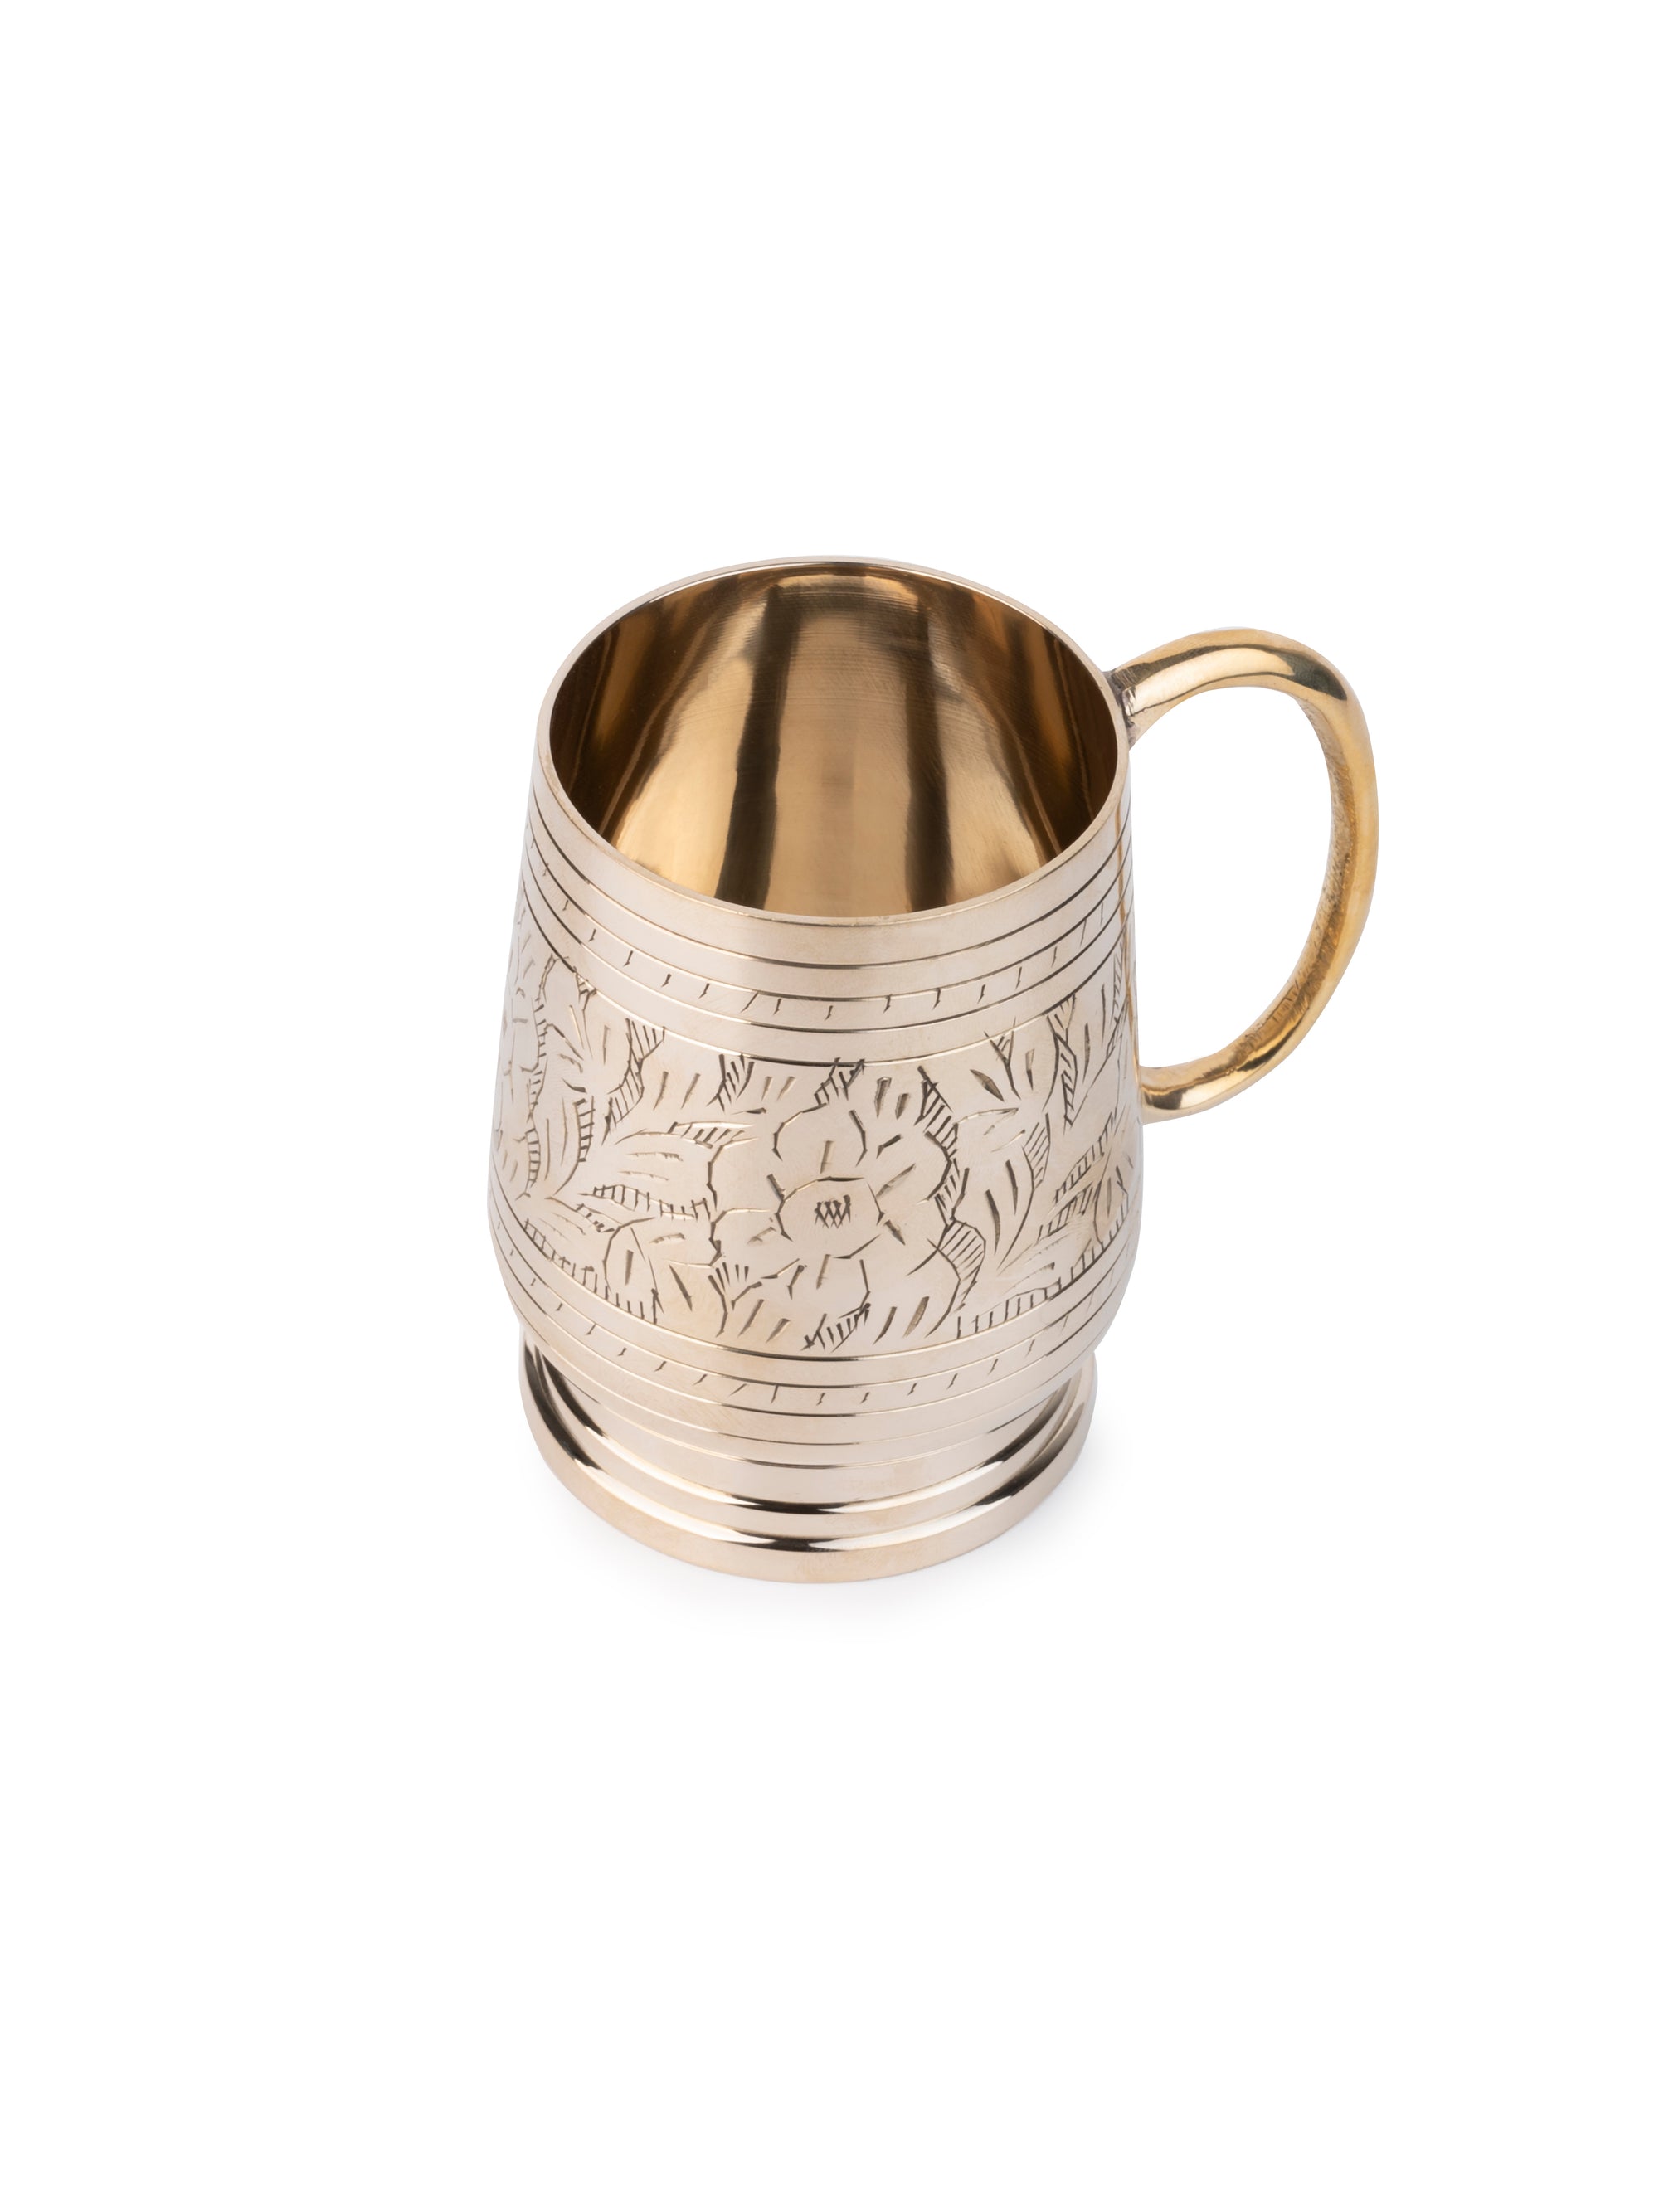 Fine Quality Brass Mug for Serving Tea / Coffee / Beer - Home and Office use